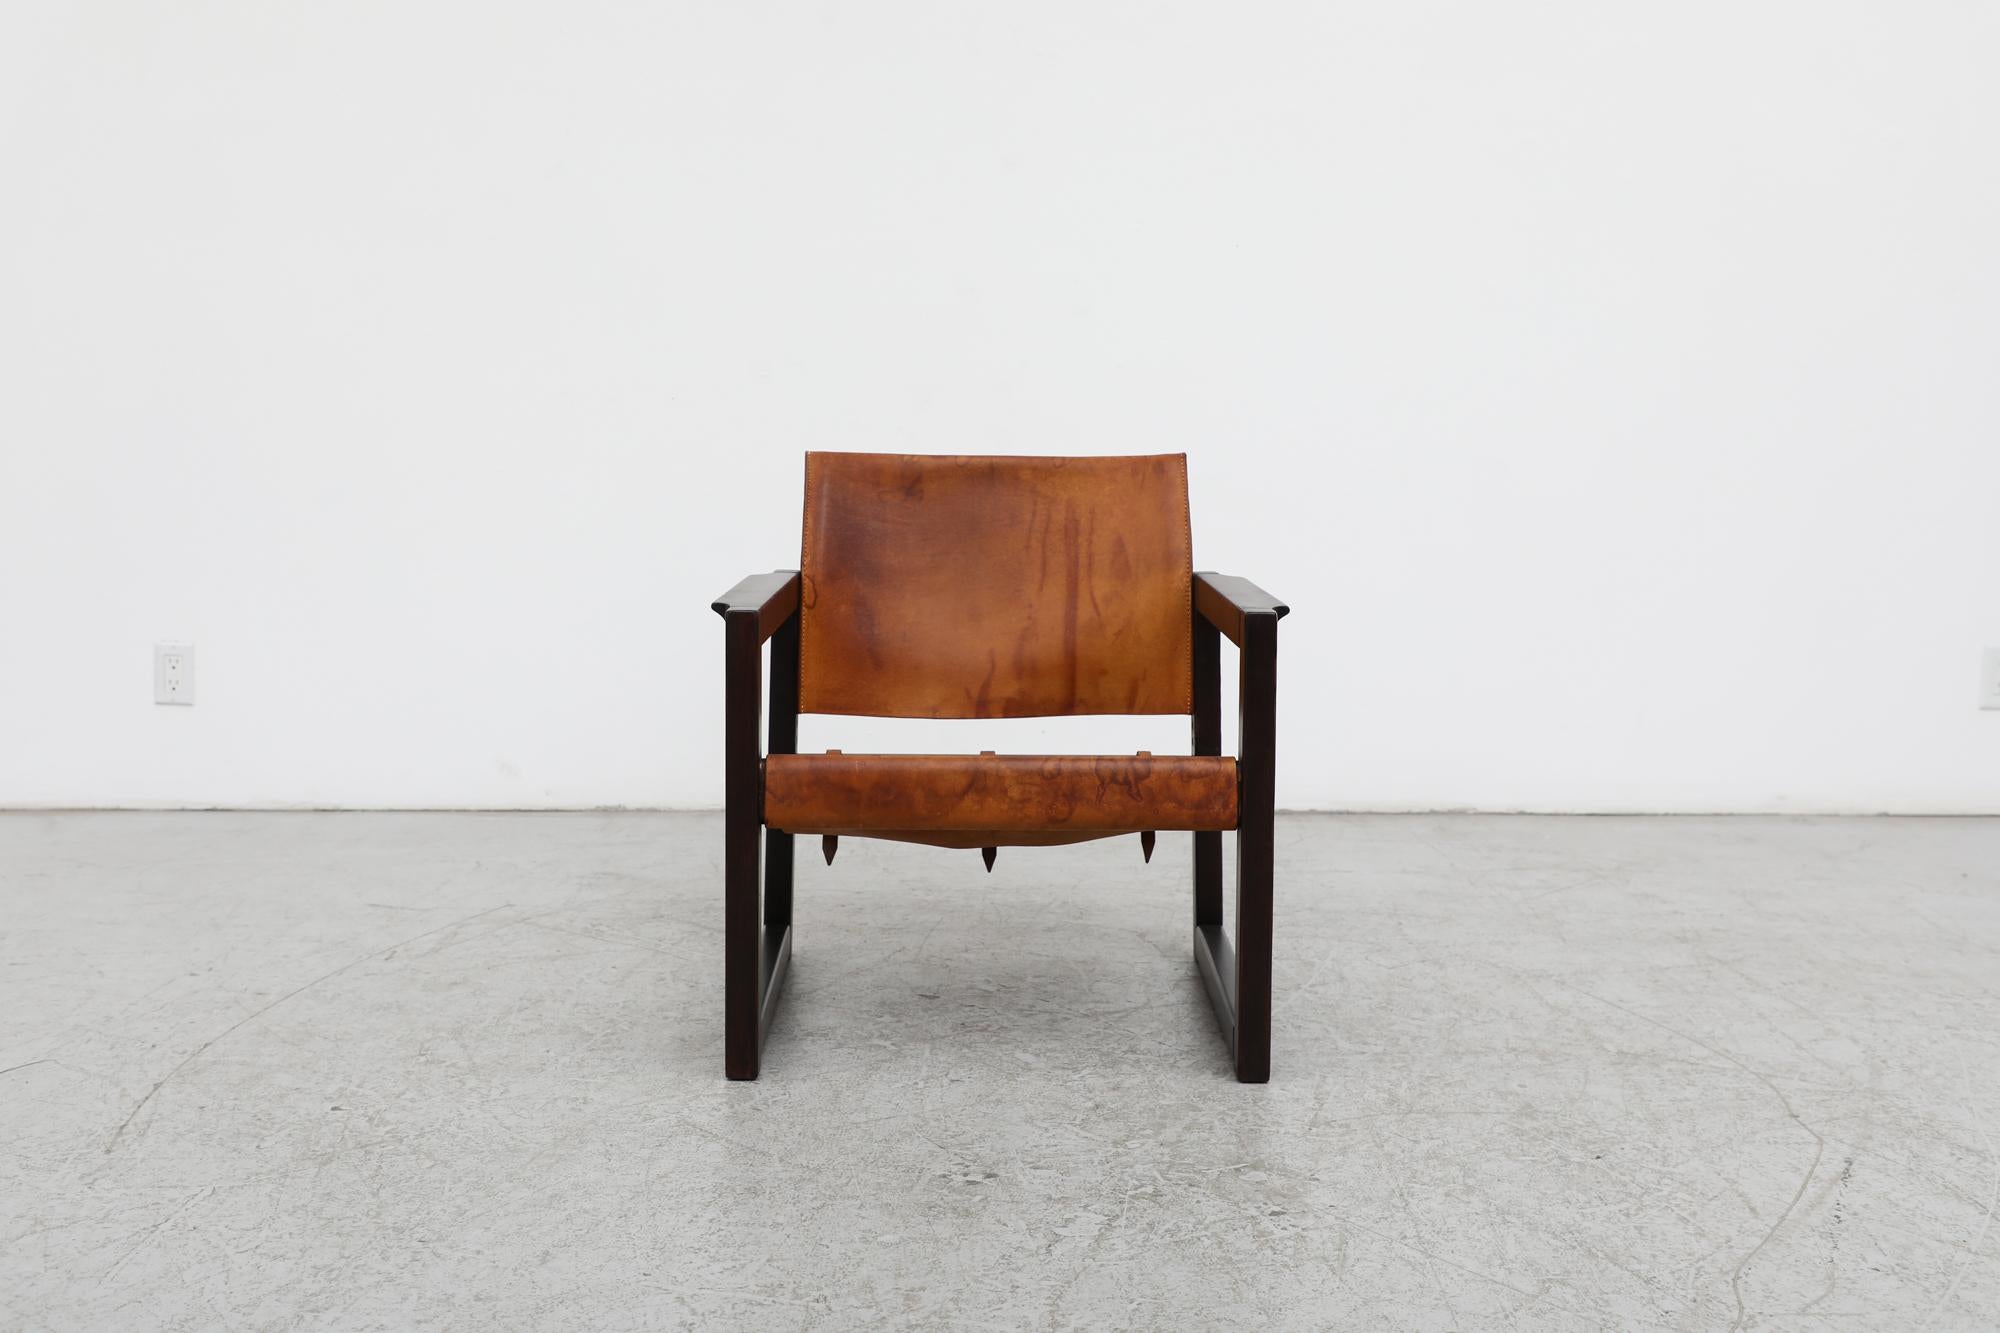 Beautiful Borge Mogensen/Kaare Klint style mid-century leather and dark stained pine safari chair by Swedish designer Karin Mobring. Mobring built off (and updated) the Cikada by designer Bengt Ruda from a decade earlier , in the process making it